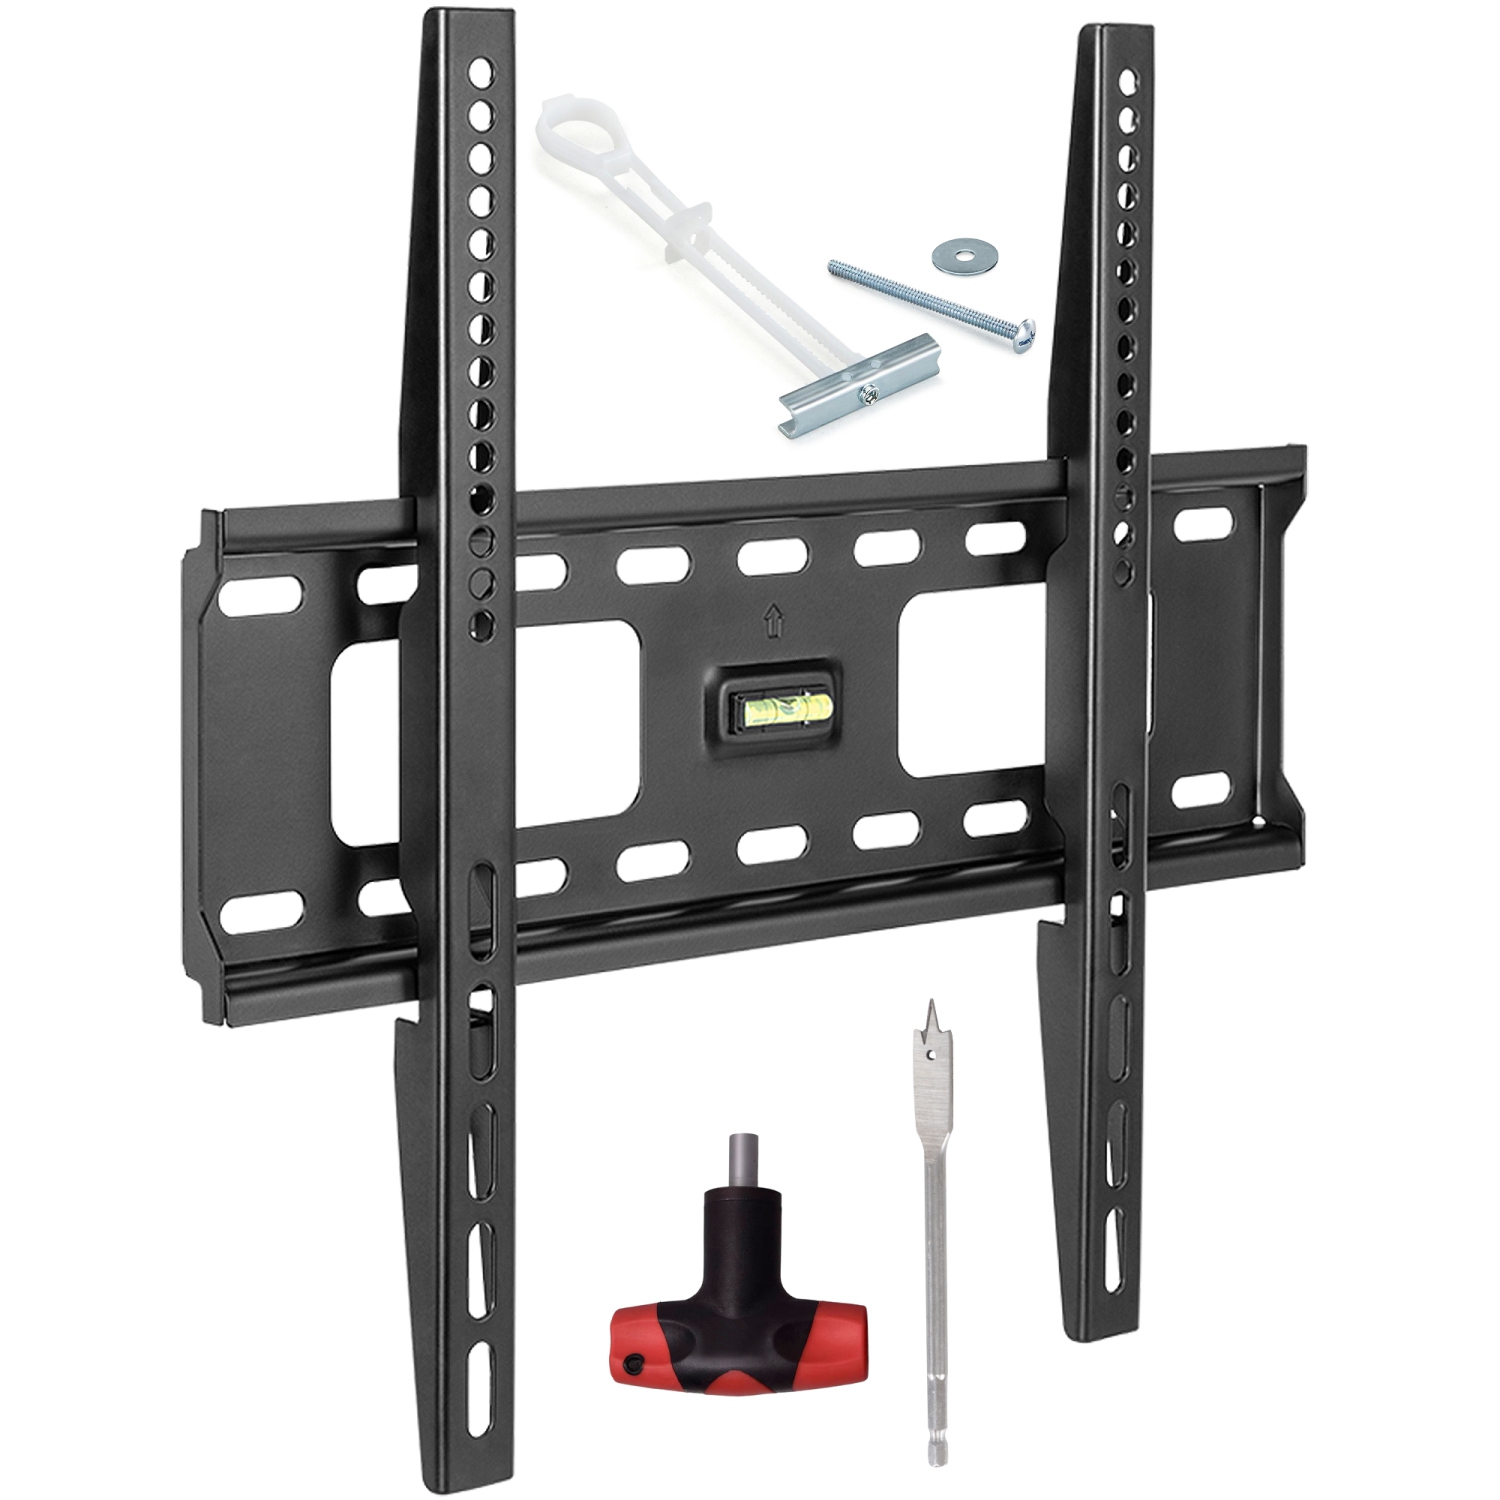 Condomounts Studless TV Wall Mount | Universal NO-Drill | NO-Stud Mounting for All Wall Types | Holds 132lbs | Fits 32"-60" TVs | Includes Elephant Anchor Set with T Shape Drill Bi